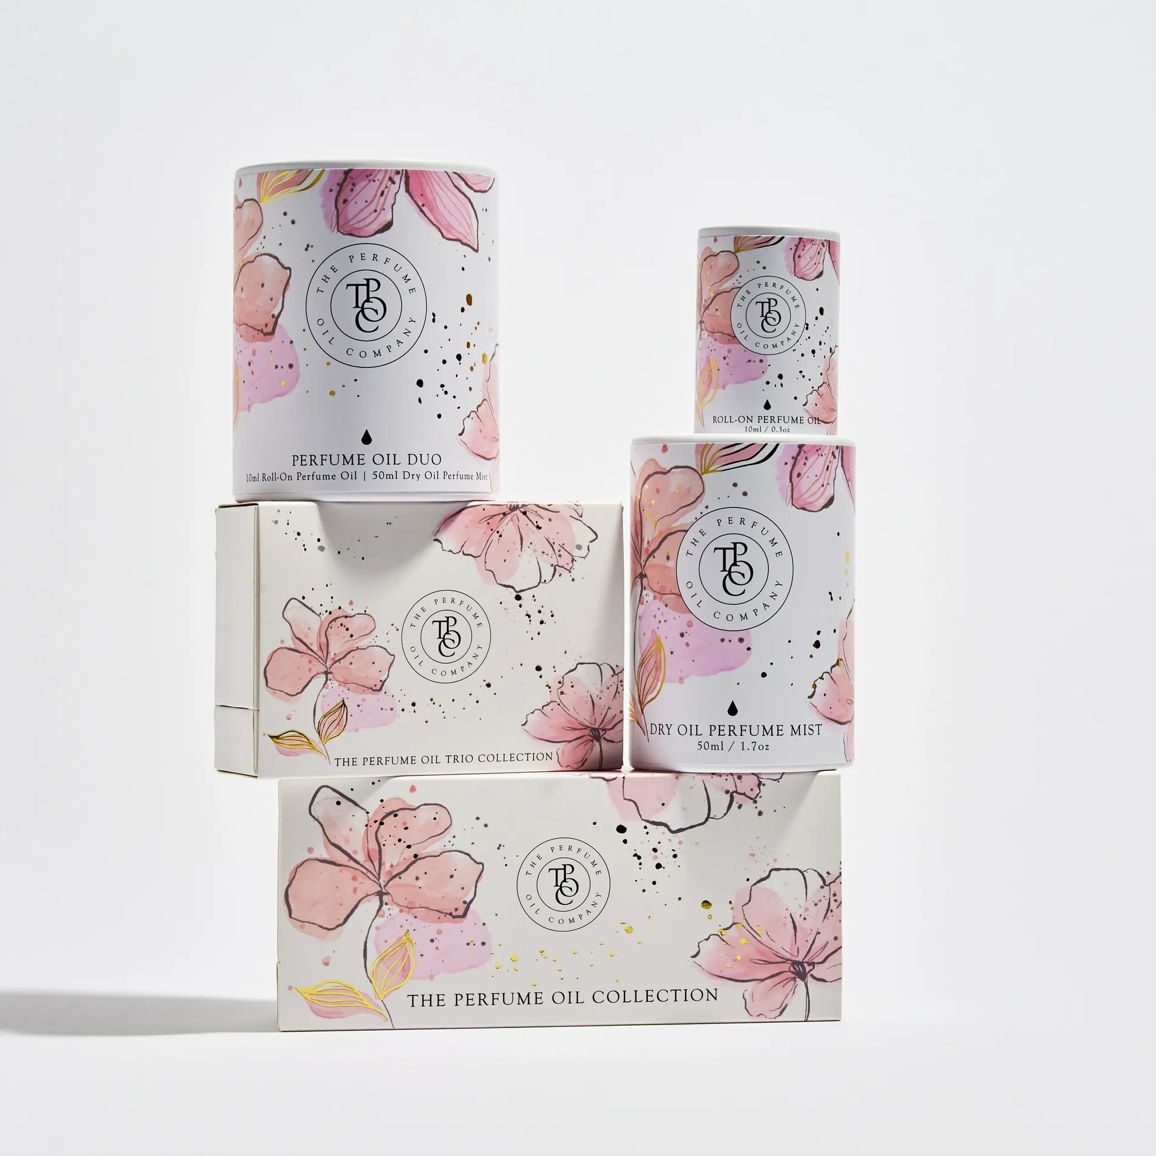 The Perfume Oil Trio Collection - A WORLD OF FLOWERS